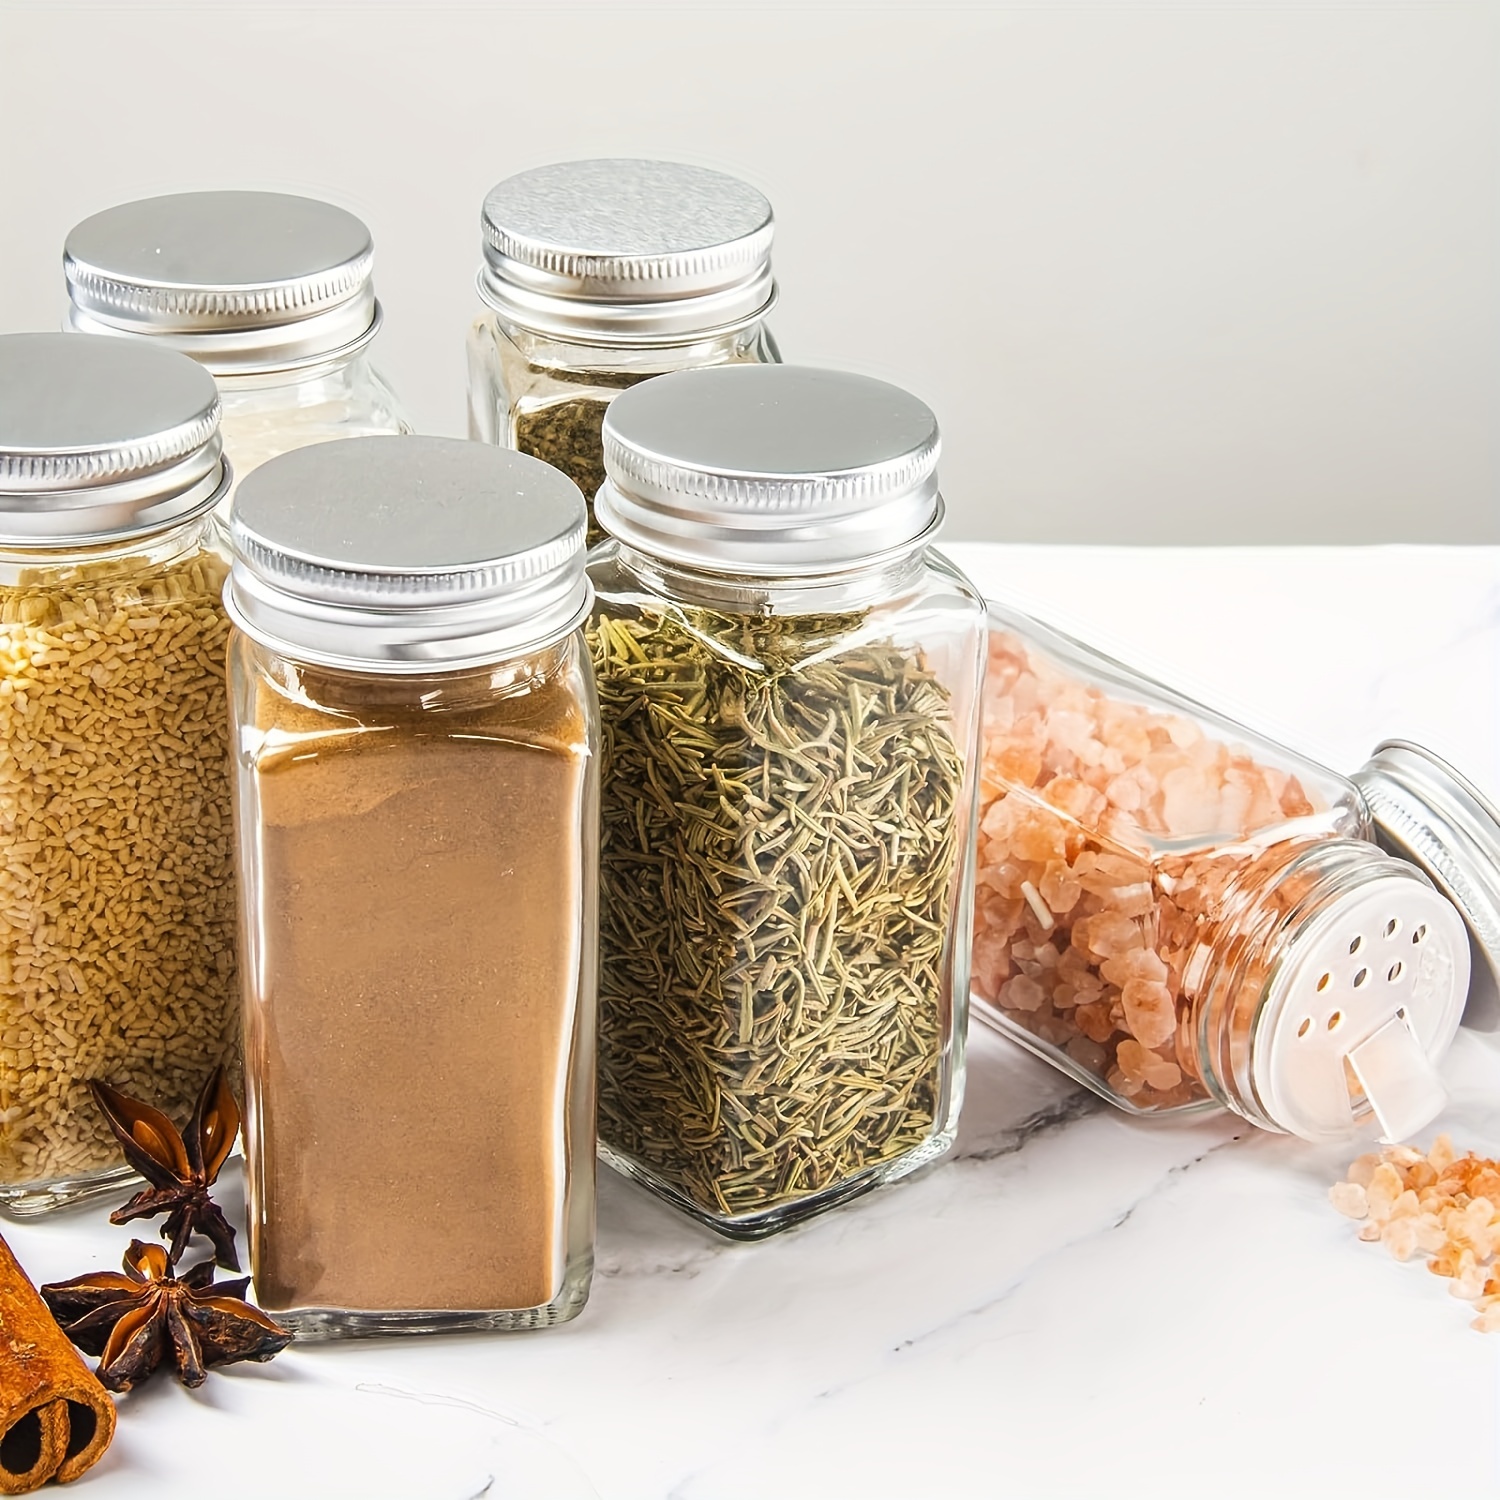 6oz, BEST VALUE 14 Glass Spice Jars includes pre-printed Spice Labels. 14  Square Empty Jars